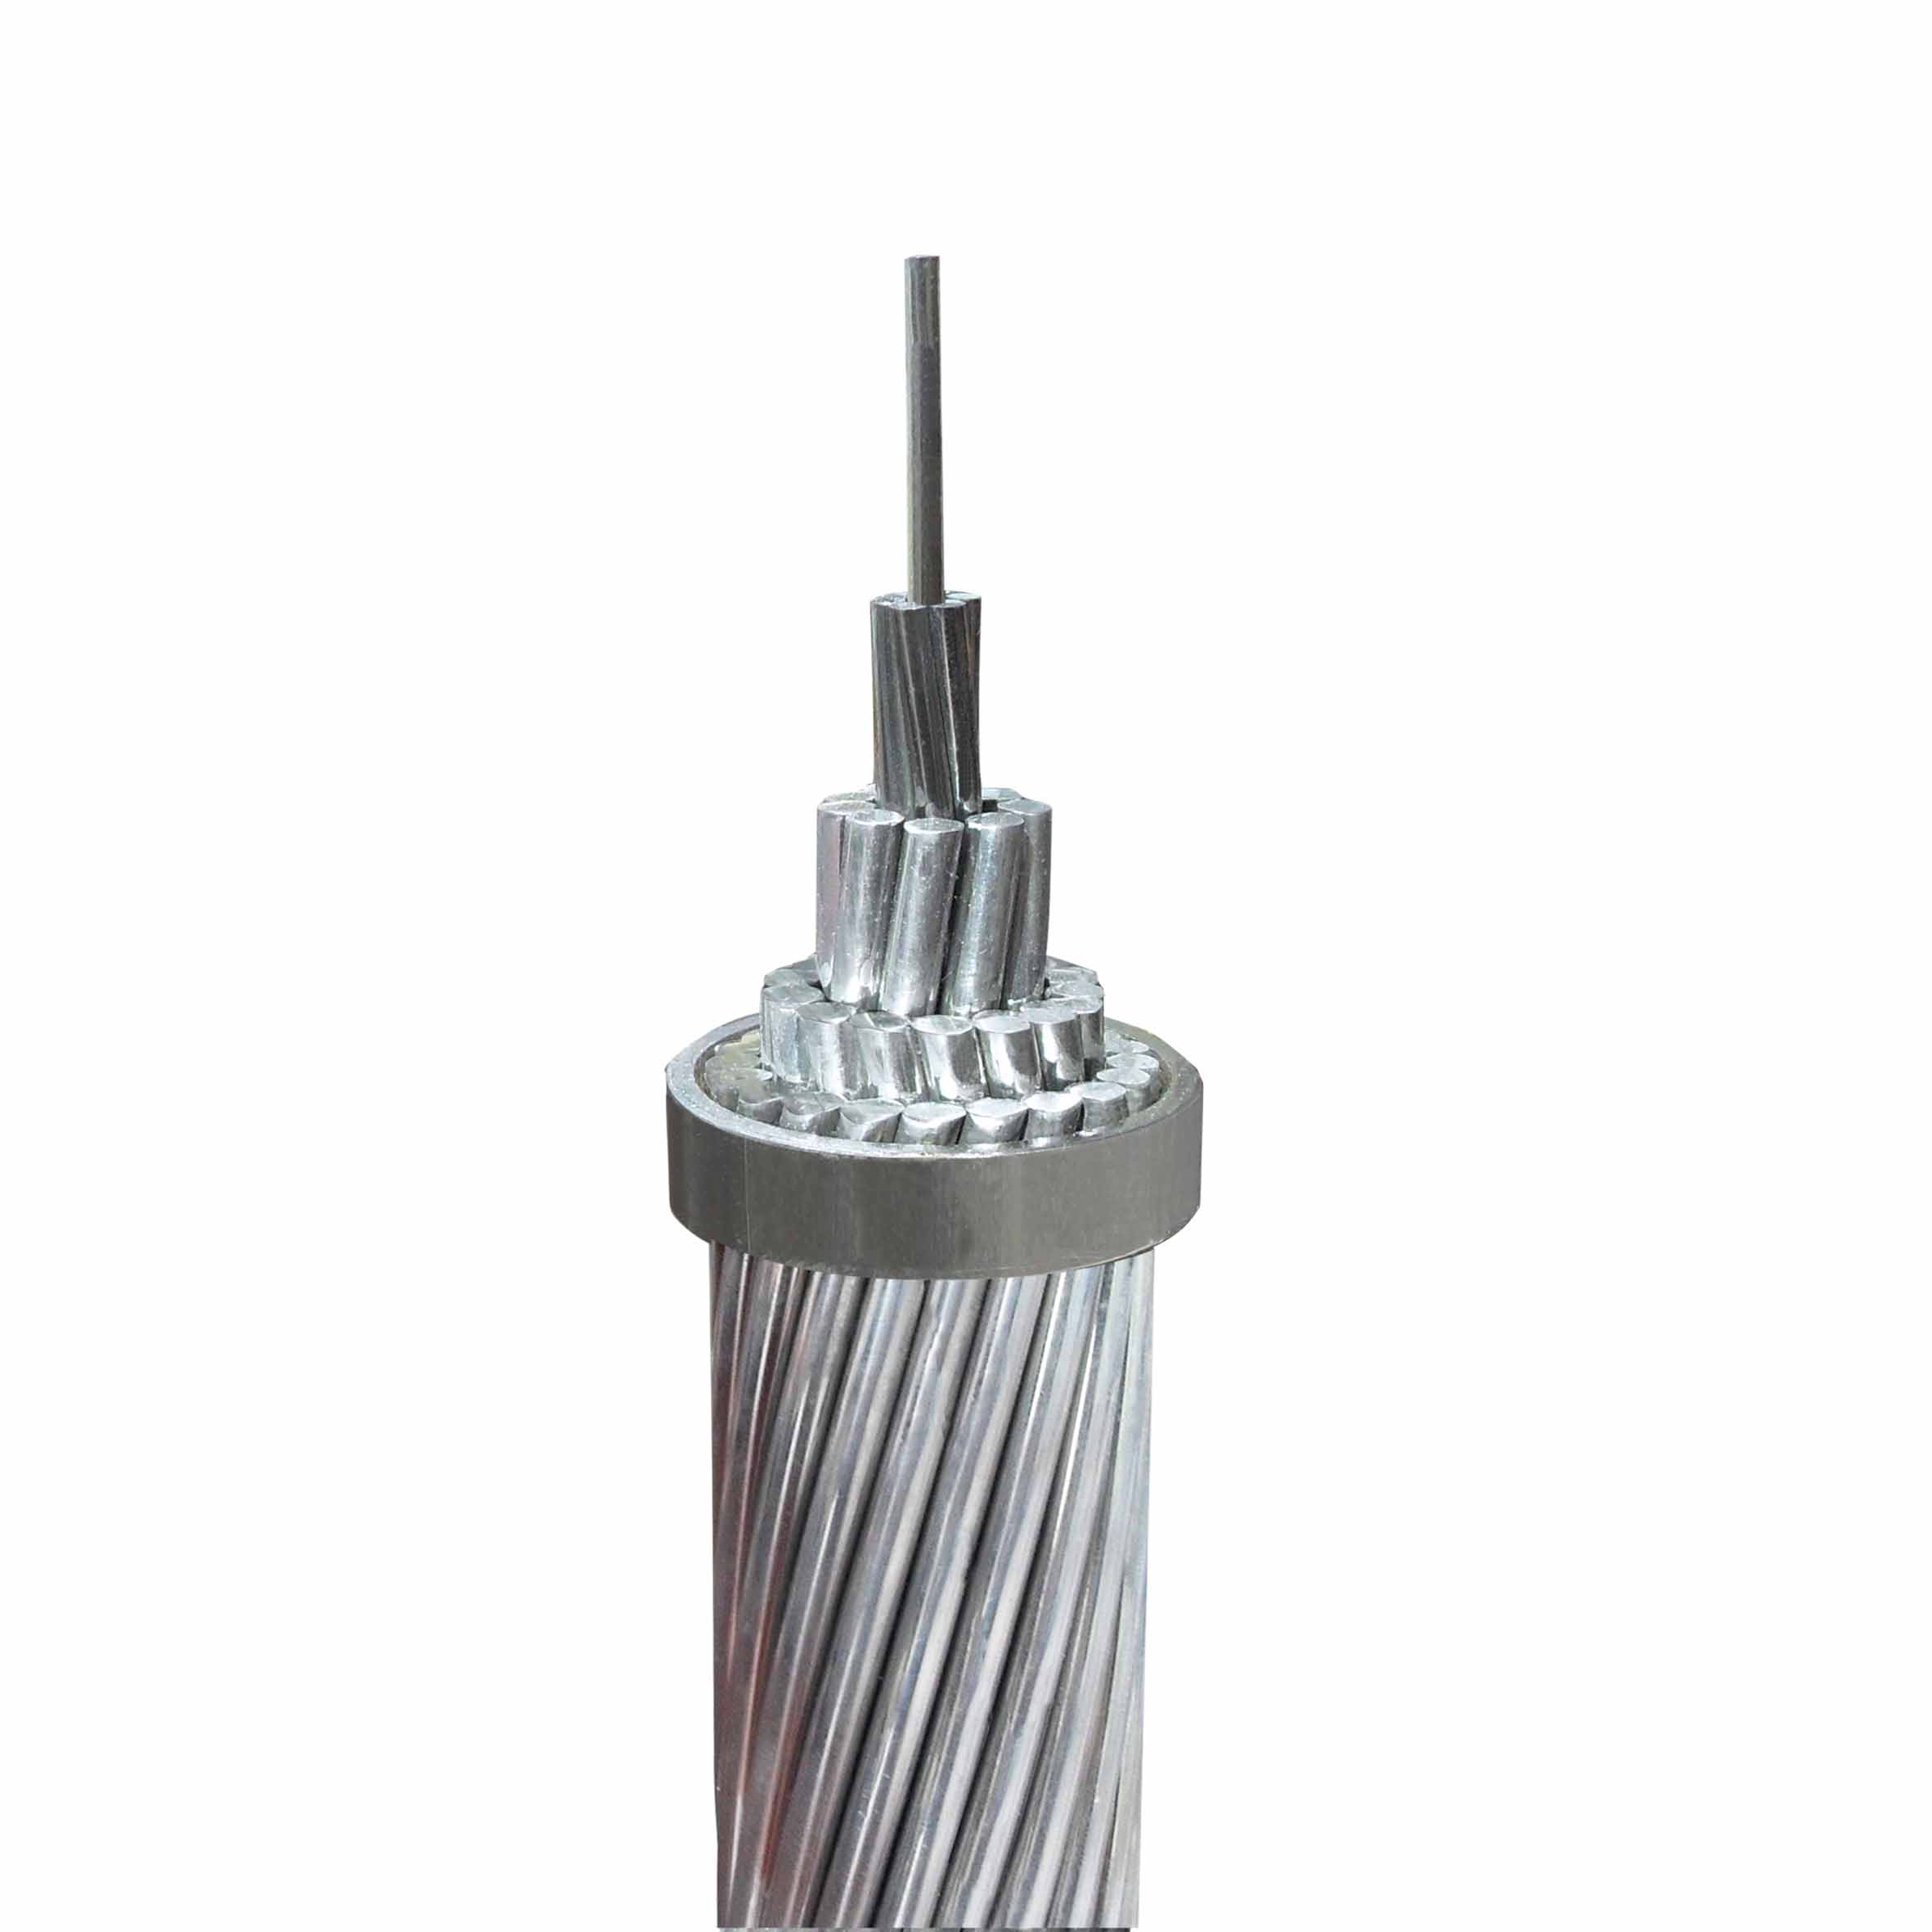 HV high voltage overhead/aerial bare conductor ACSR/AAC/AAAC with IEC ASTM standards